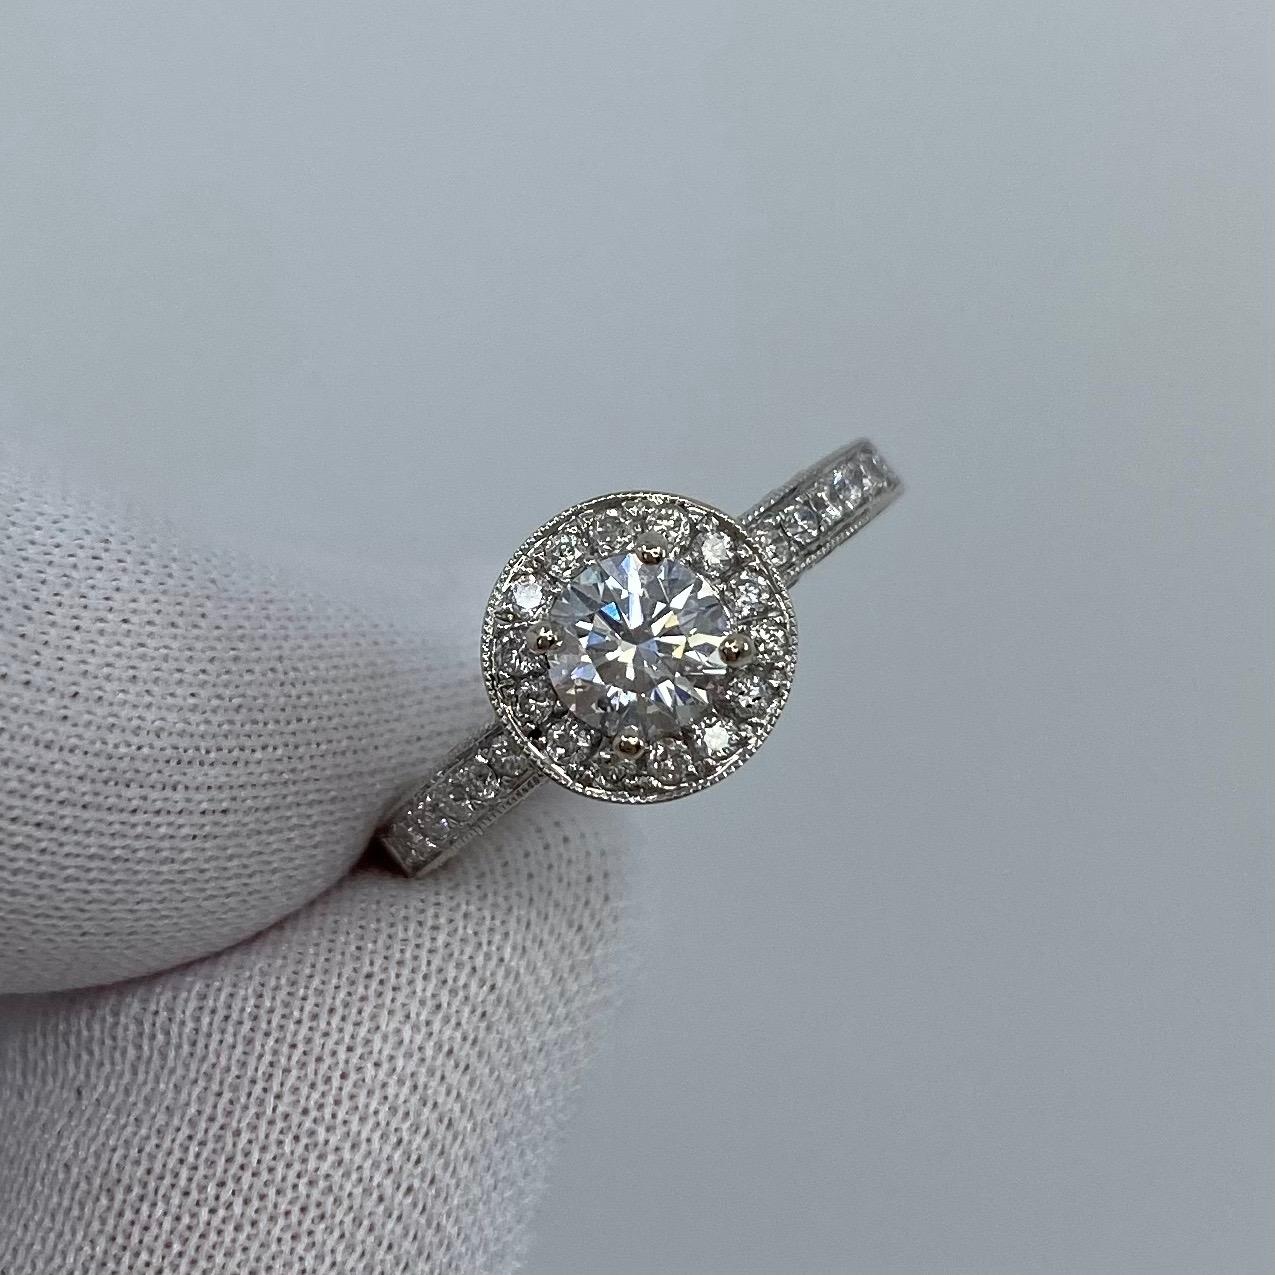 Round White Diamond 18k White Gold Halo Ring.

A beautiful 18 Karat white gold diamond halo ring with pave-set diamonds on the shoulders and around the setting.
0.48 Carat centre diamond with SI2 clarity and G/H colour, also has an excellent round